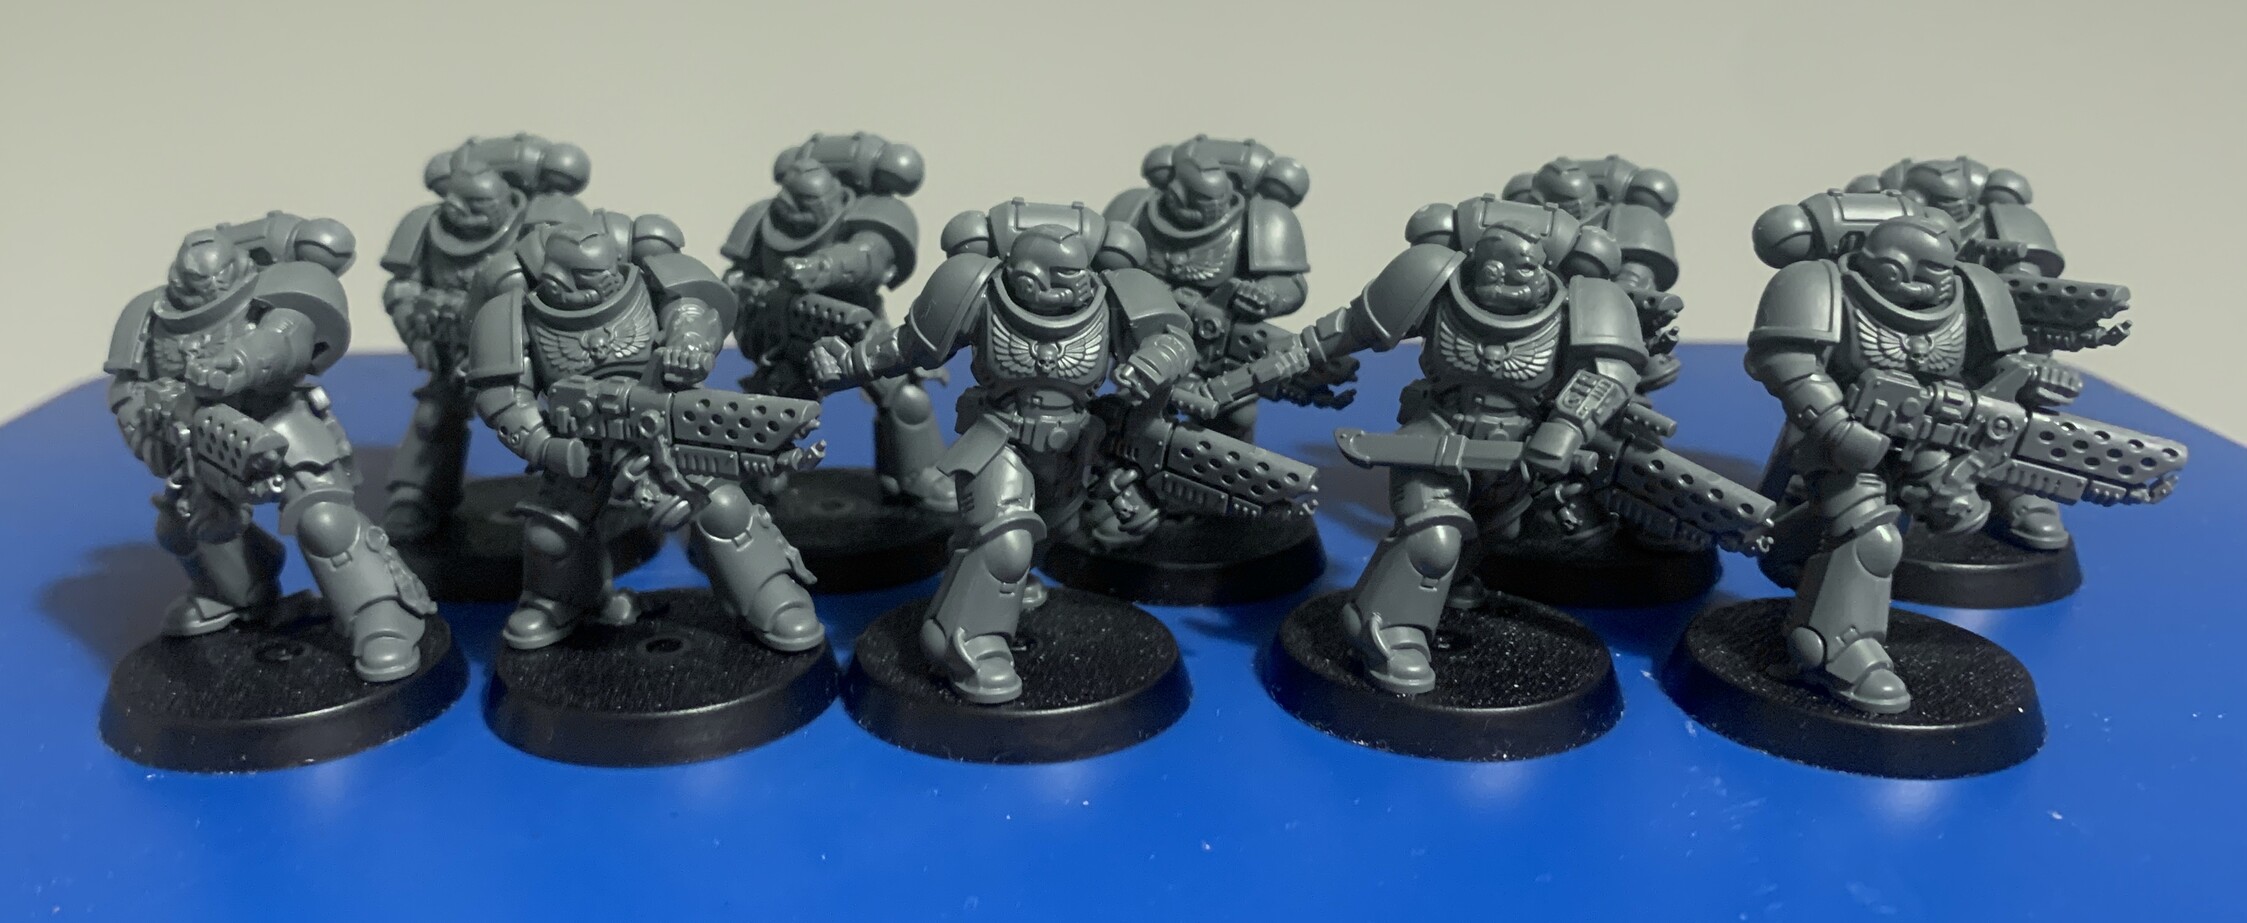 10 Infernus Marines from the Warhammer 40k universe stood in two ranks of 5. All models carry a pyre blaster which is a flame weapon that is shaped like a gun, has a pilot light at the front with the barrel protected by a perforated housing. The front center model has a pyre blaster on their back and is throwing a grenade. The model to the right of that also has a pyre laser on their back and is wielding a large knife and a pistol. The other 8 models are holding the pyre blaster in front of them with both hands in various positions.